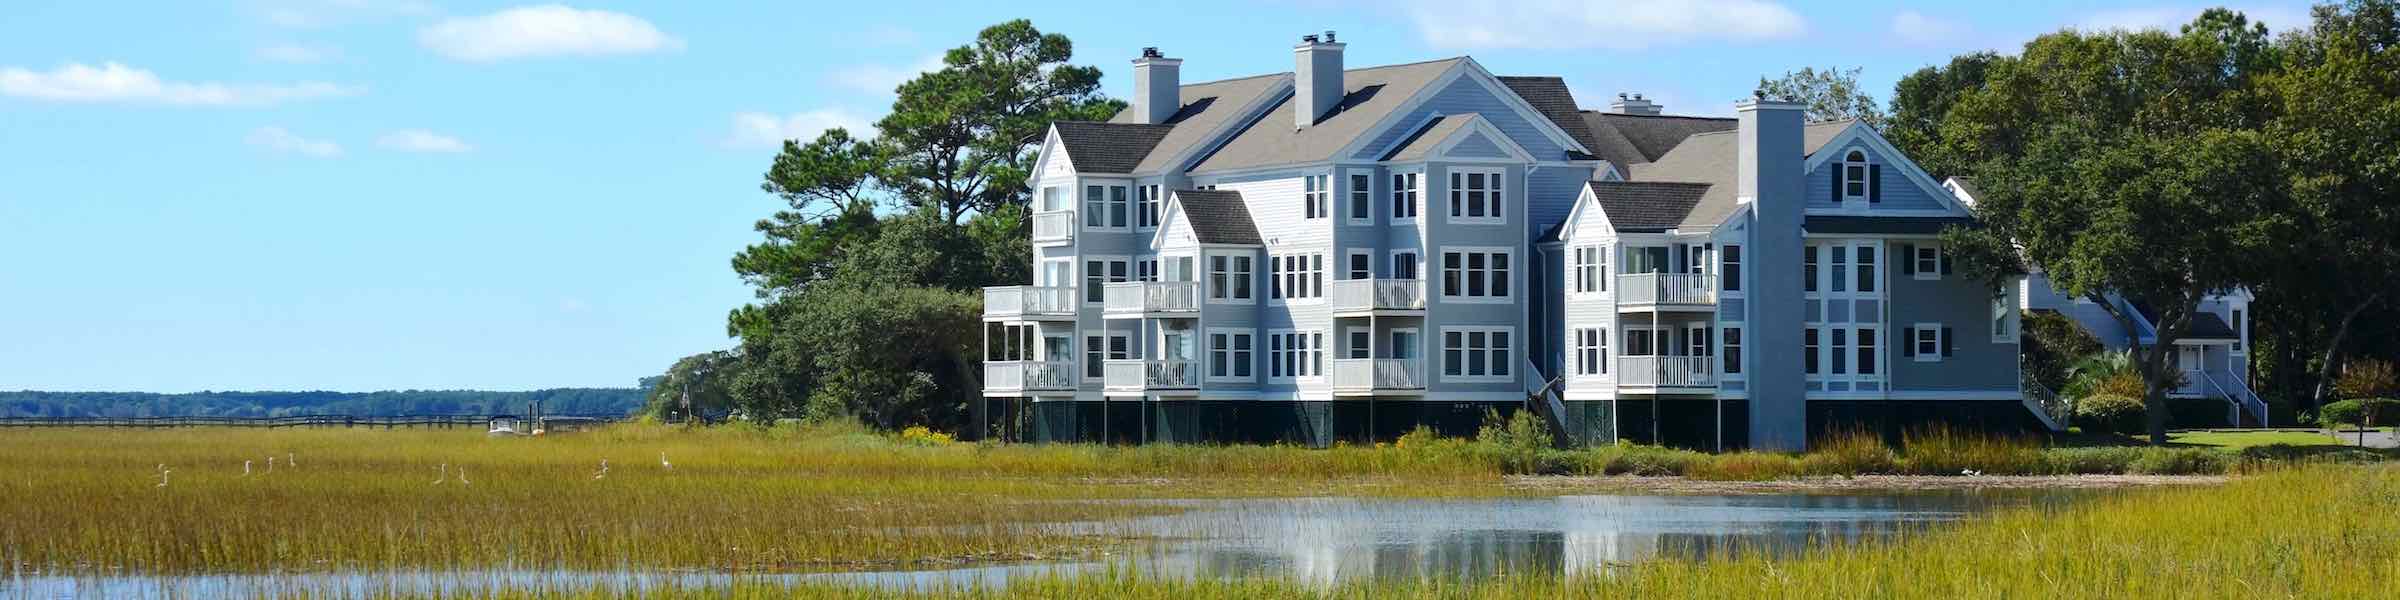 House by the marsh at Murrells Inlet, SC.